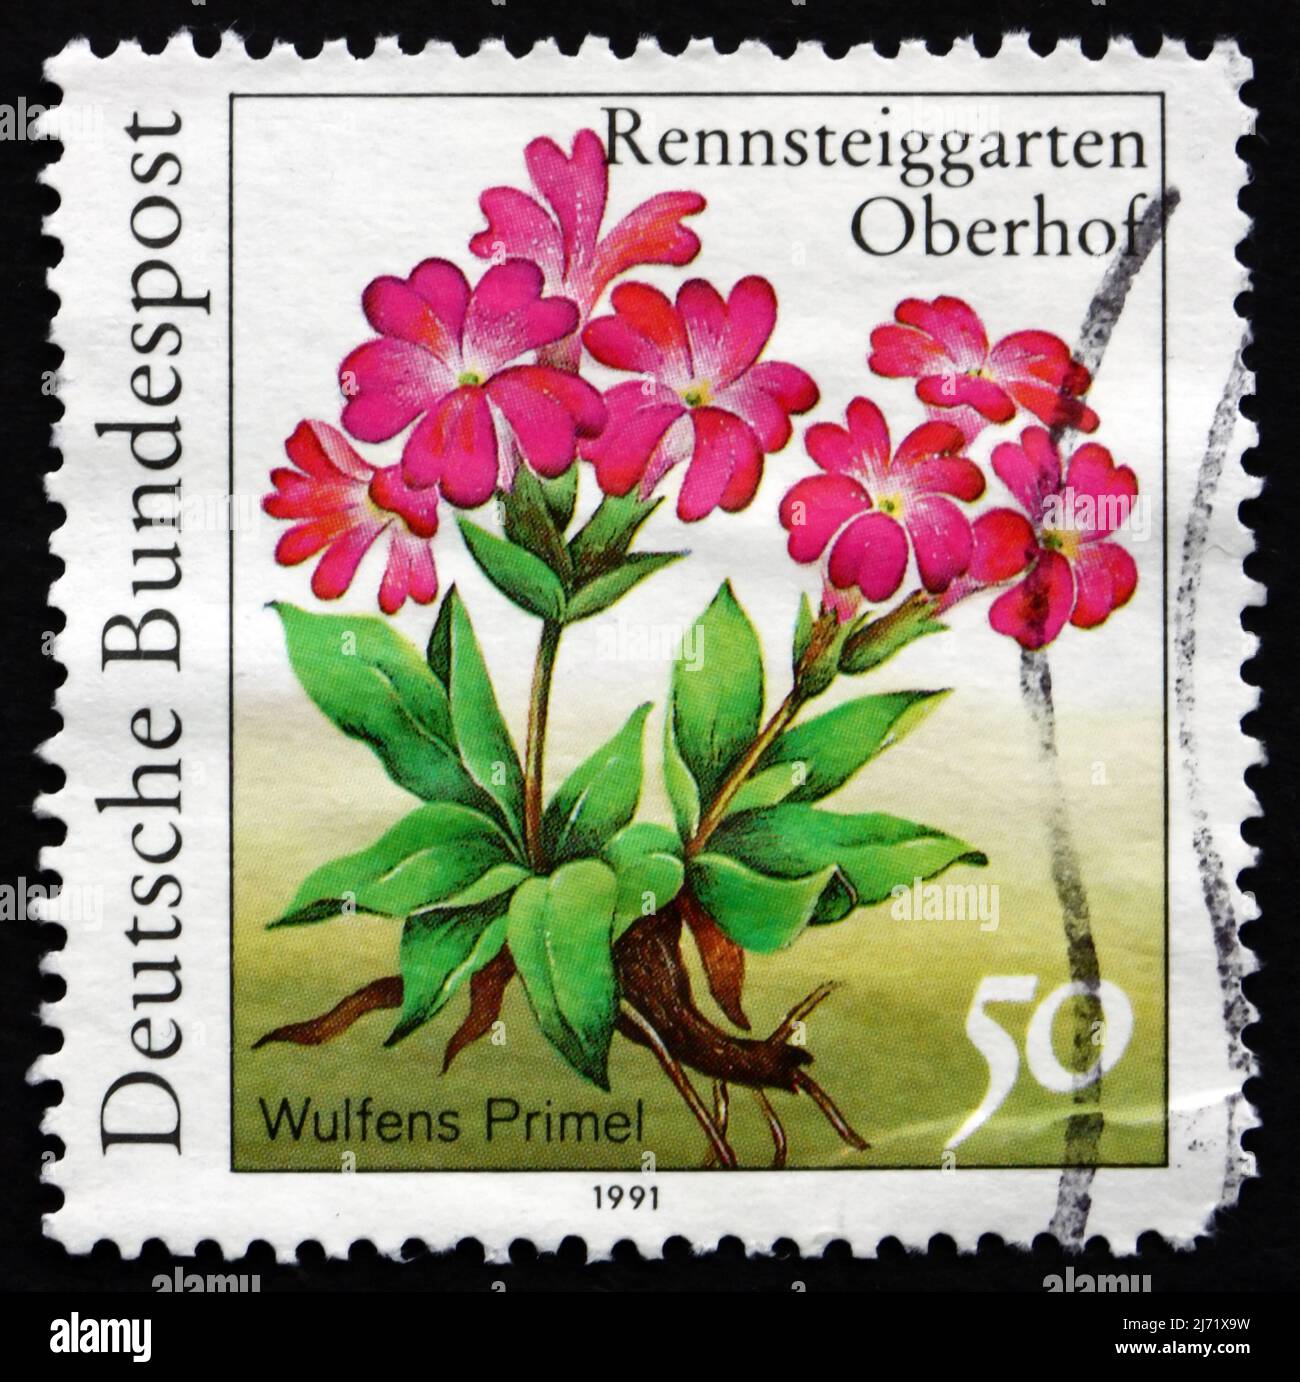 GERMANY - CIRCA 1991: a stamp printed in the Germany shows Wulfens Primel, Primula Wulfeniana, Herbaceous Plant, circa 1991 Stock Photo